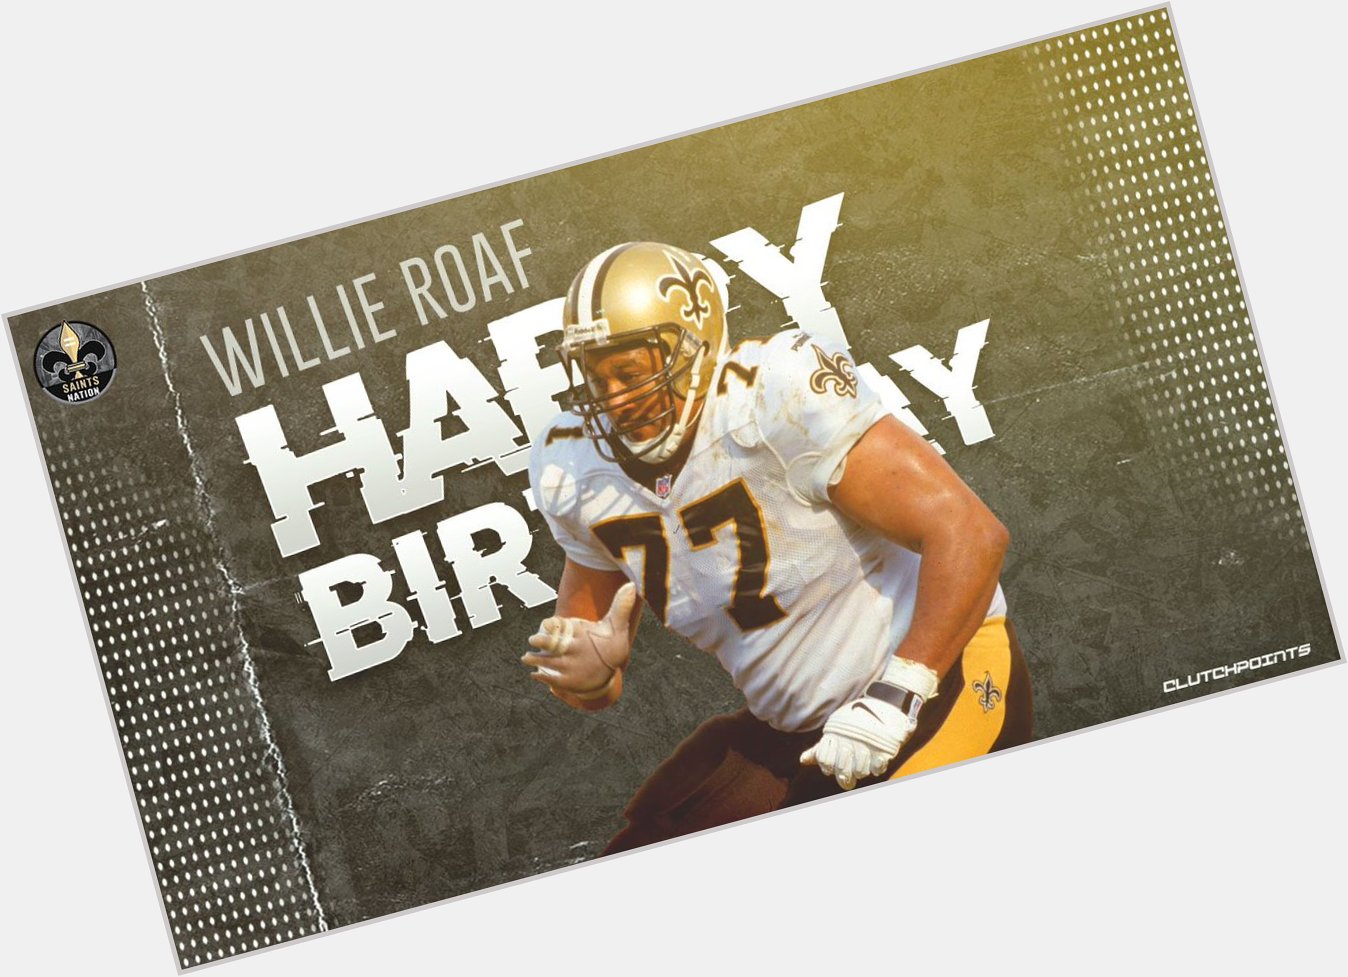 Join Saints Nation in greeting Hall-of-Famer Willie Roaf a happy 51st birthday 